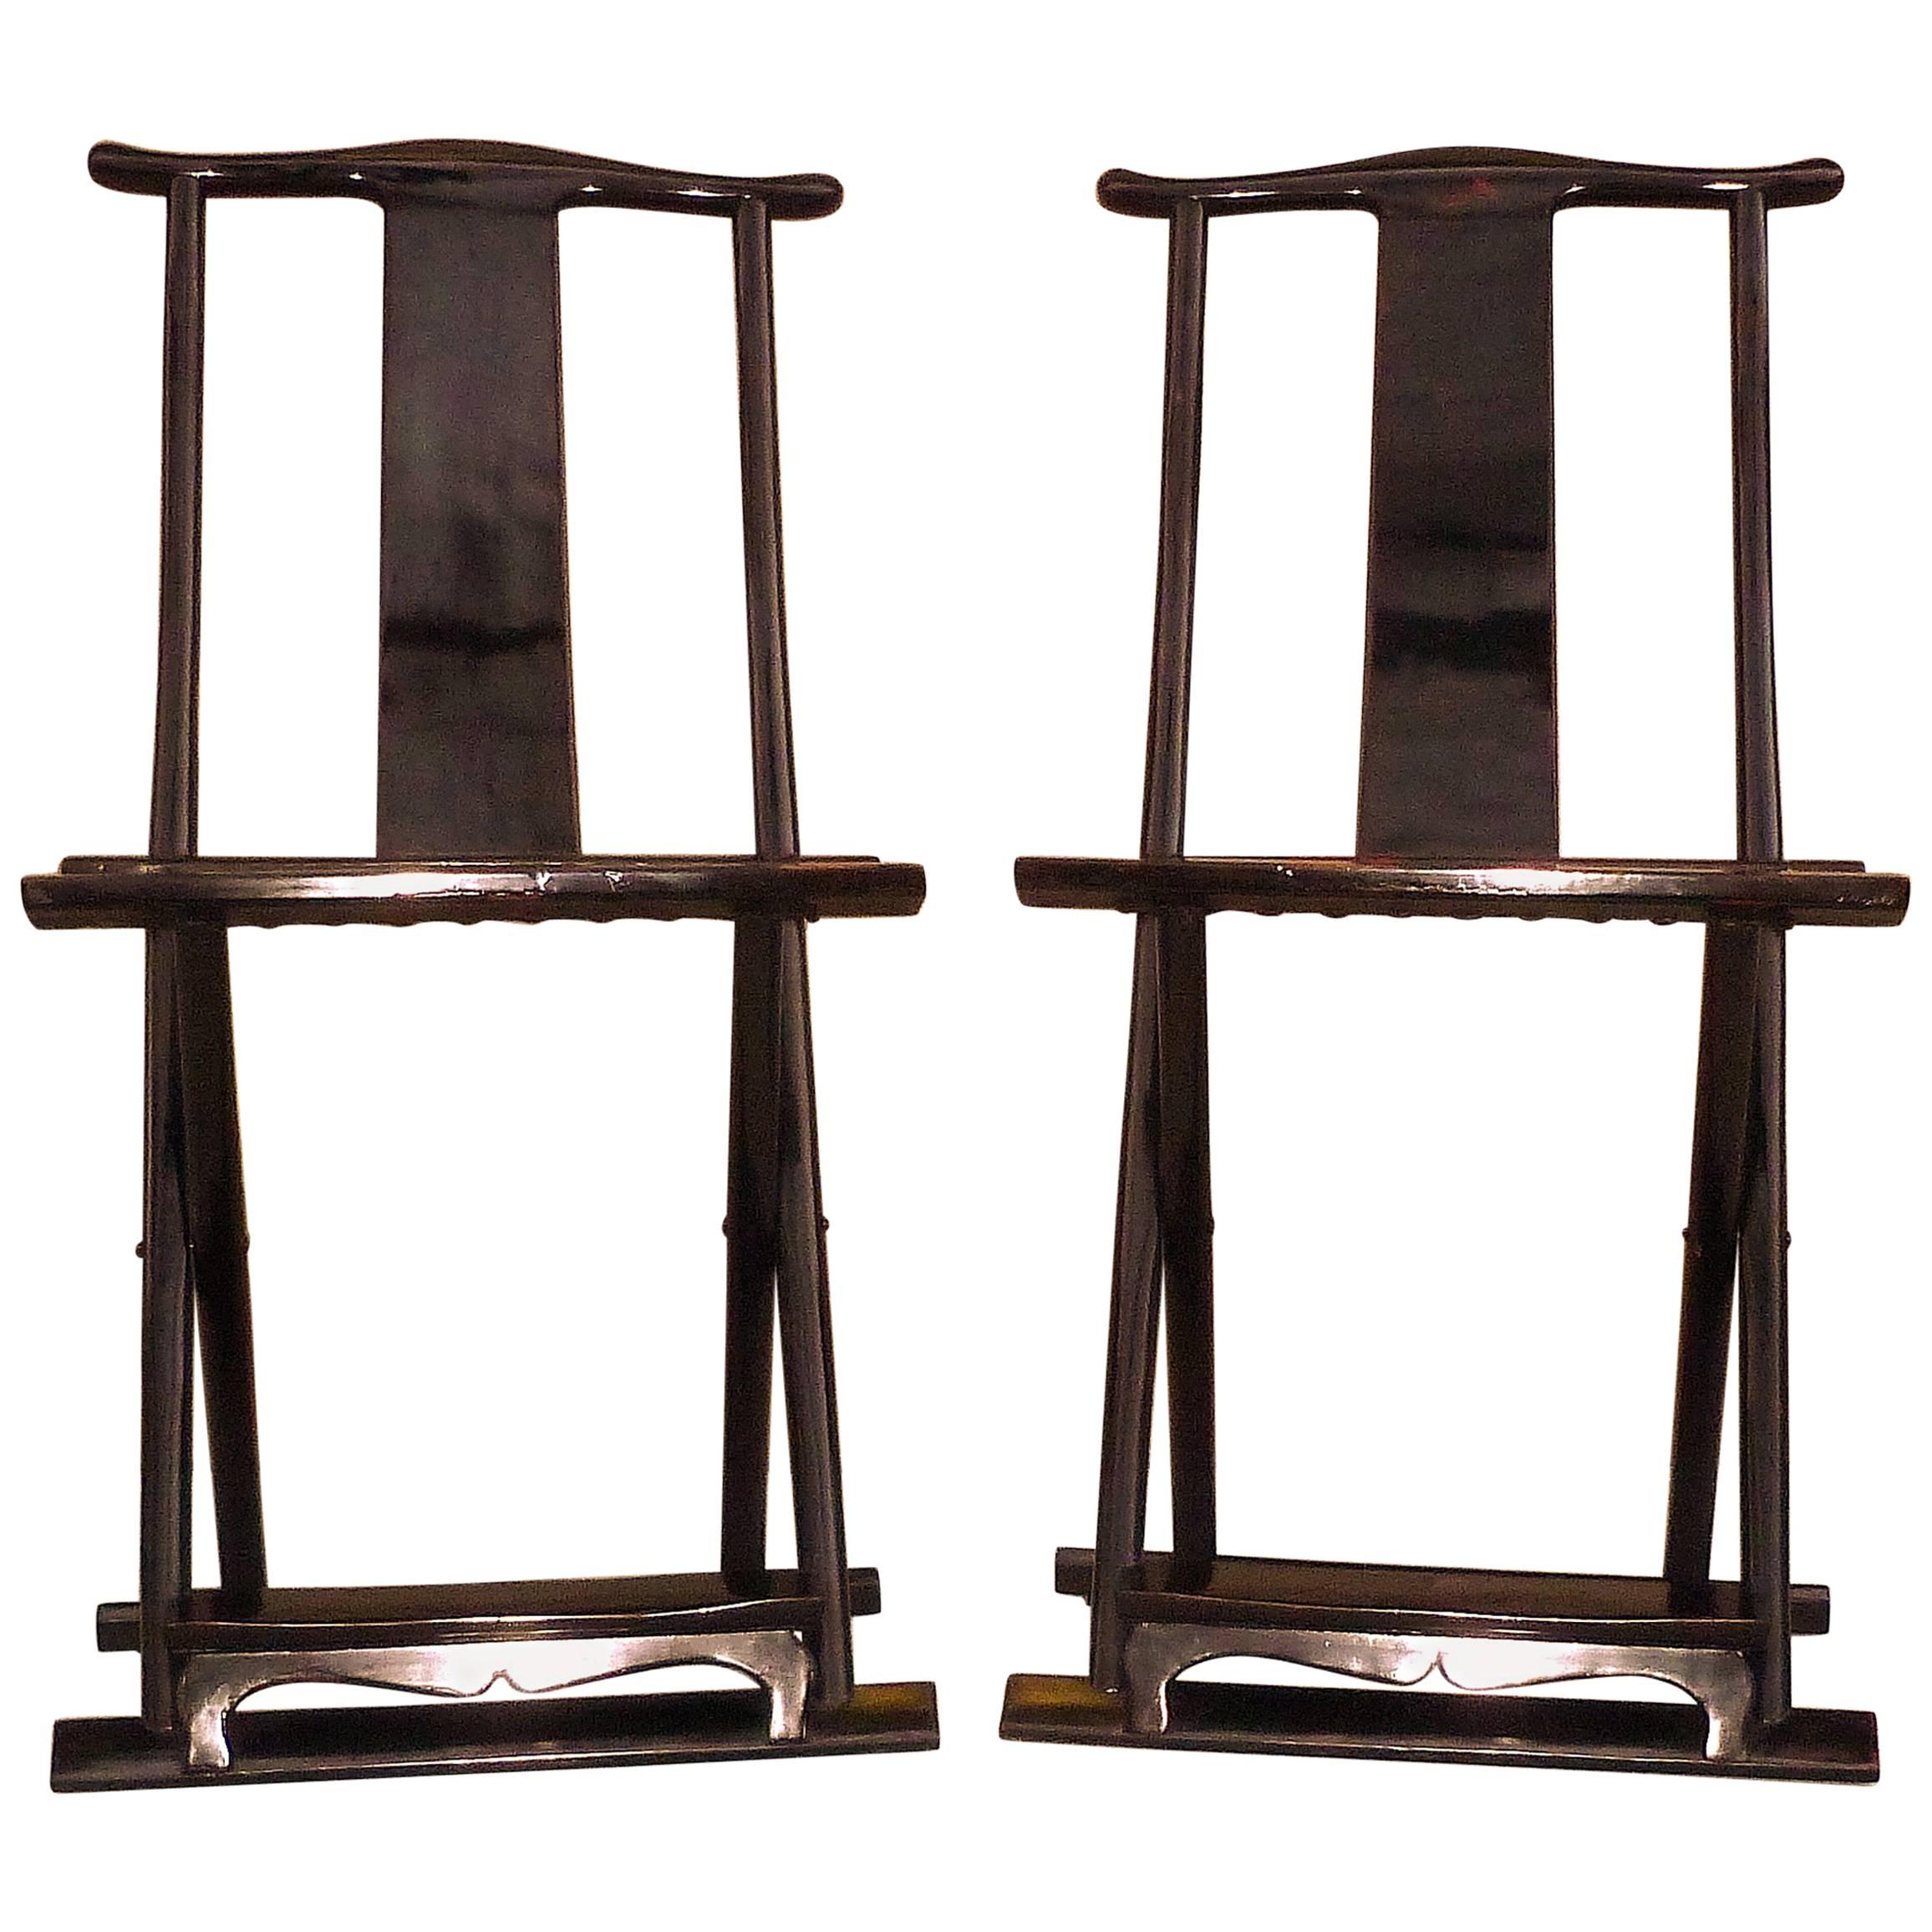 Pair of Black Lacquer Folding Chairs